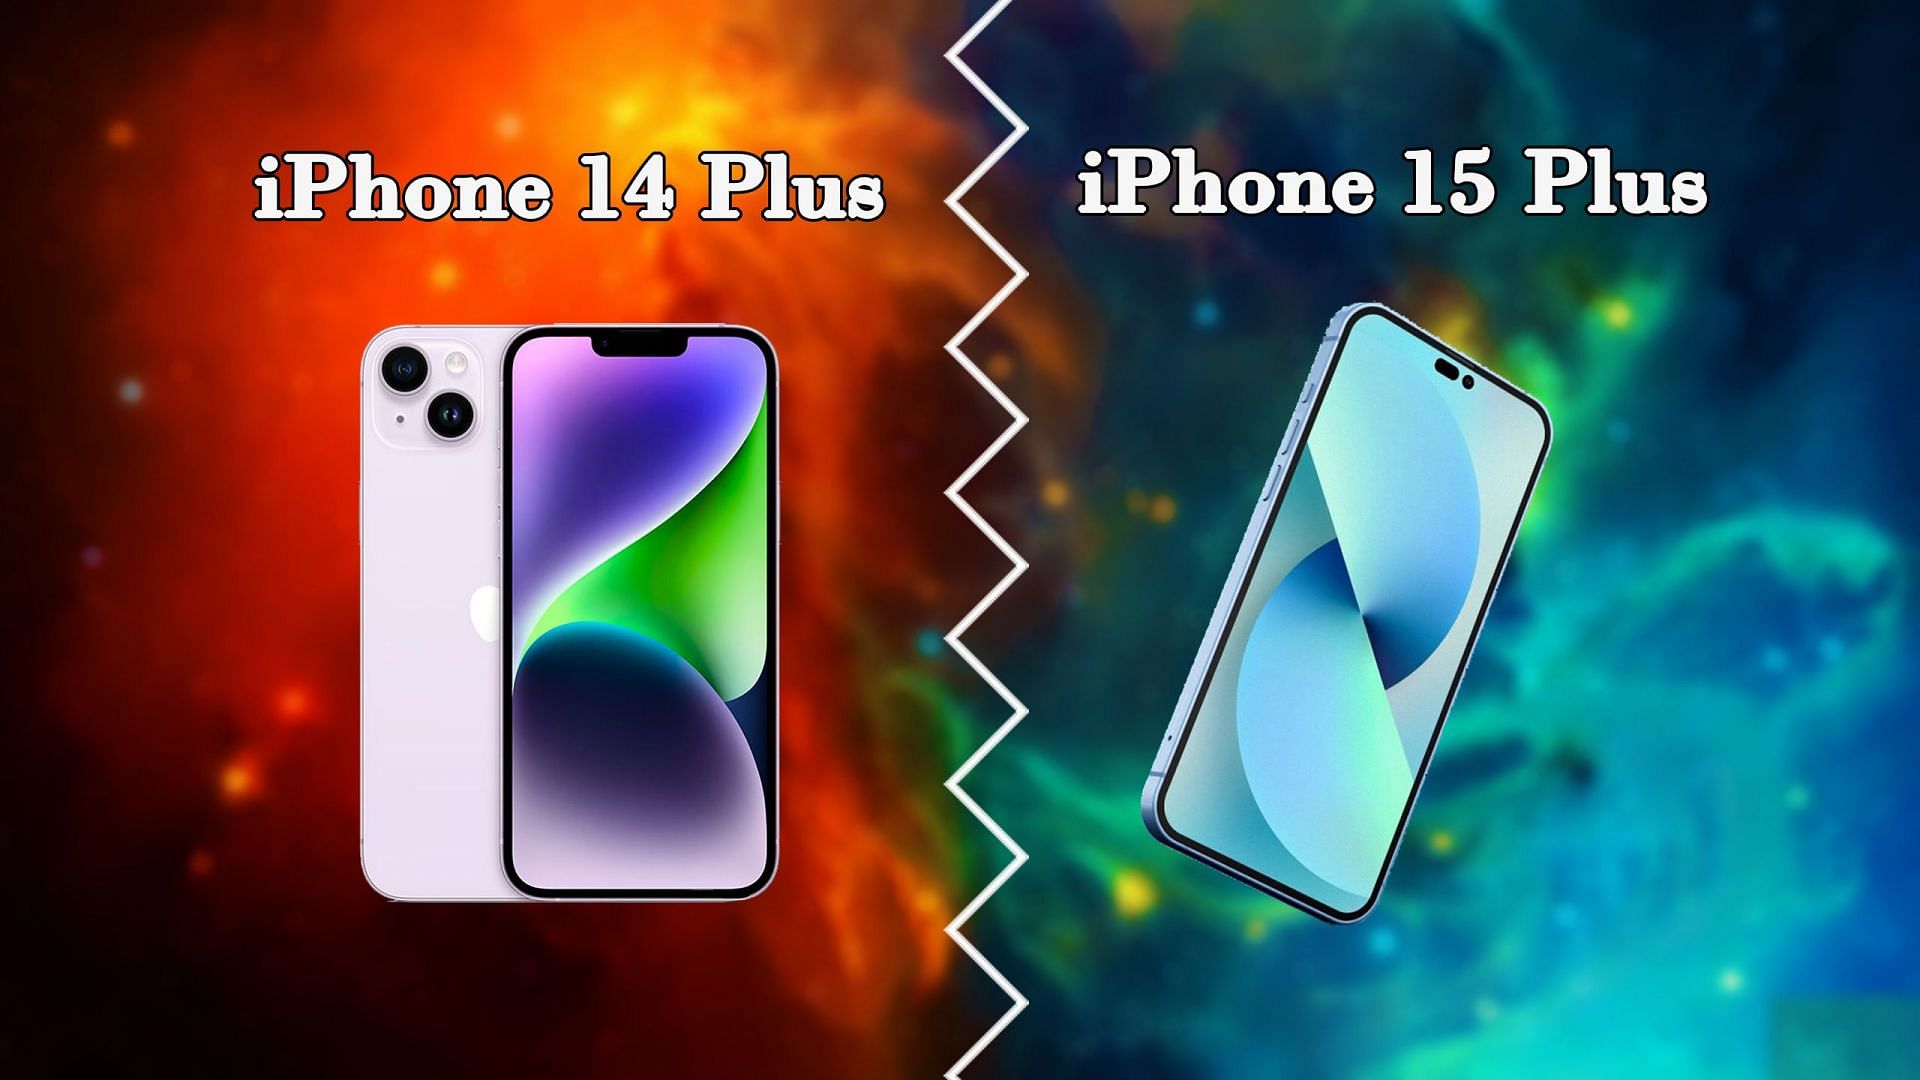 Comparing iPhone 15 Plus and iPhone 14 Plus: are the upgrades